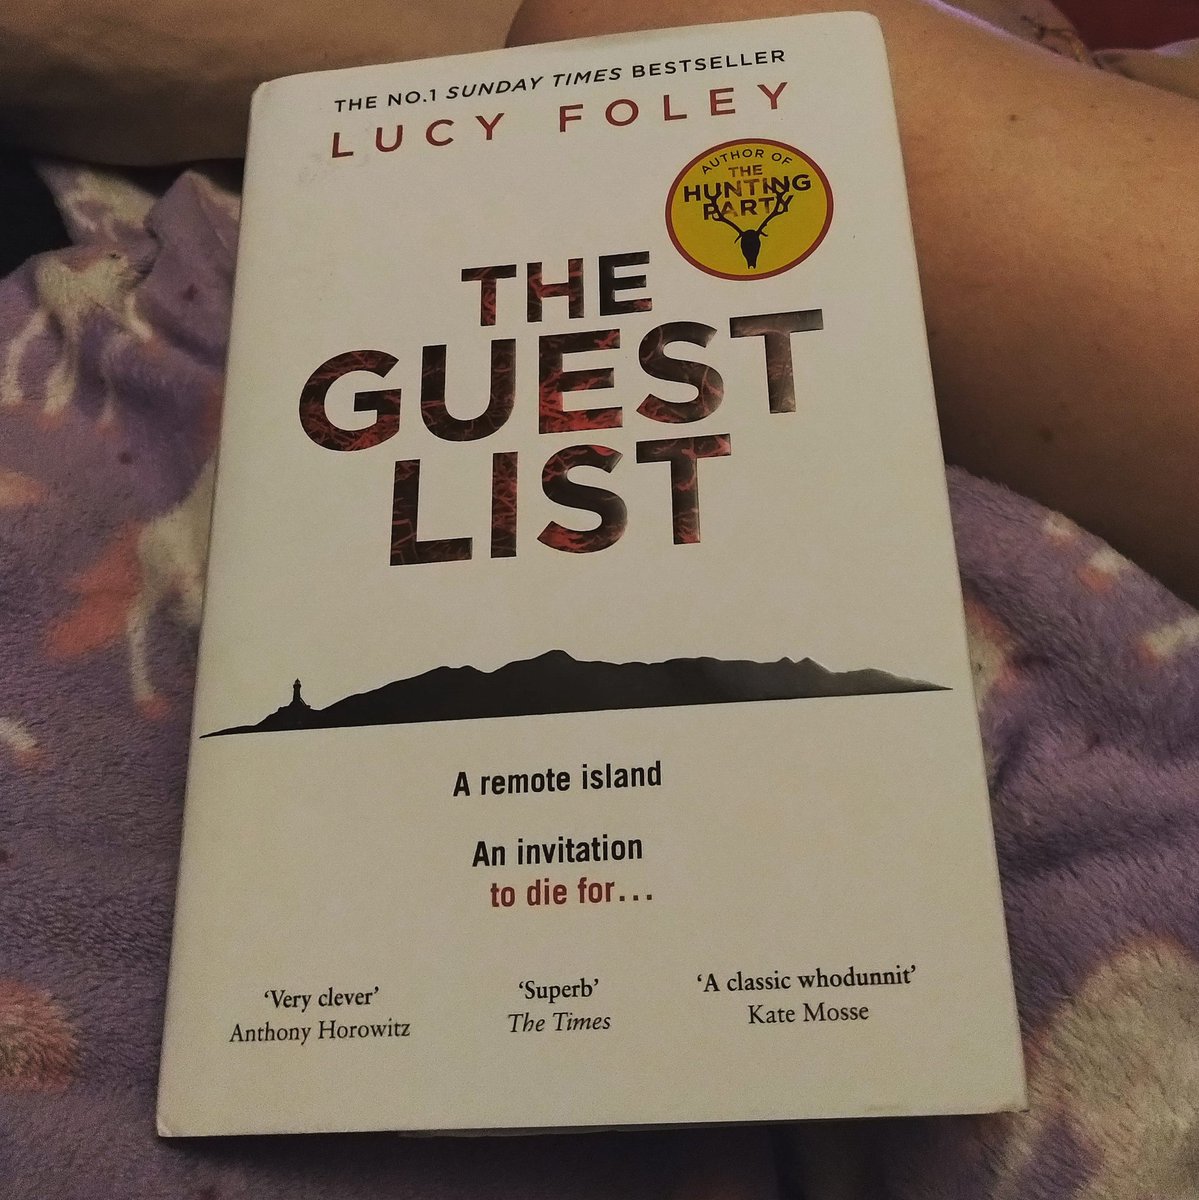 Up next #reading #book #TheGuestList #author #LucyFoley #HrperCollins #Hardback

*

Defo just one chapter, didn't sleep last night and working tomorrow, ok maybe two 🙈🤭 short chapters xxx